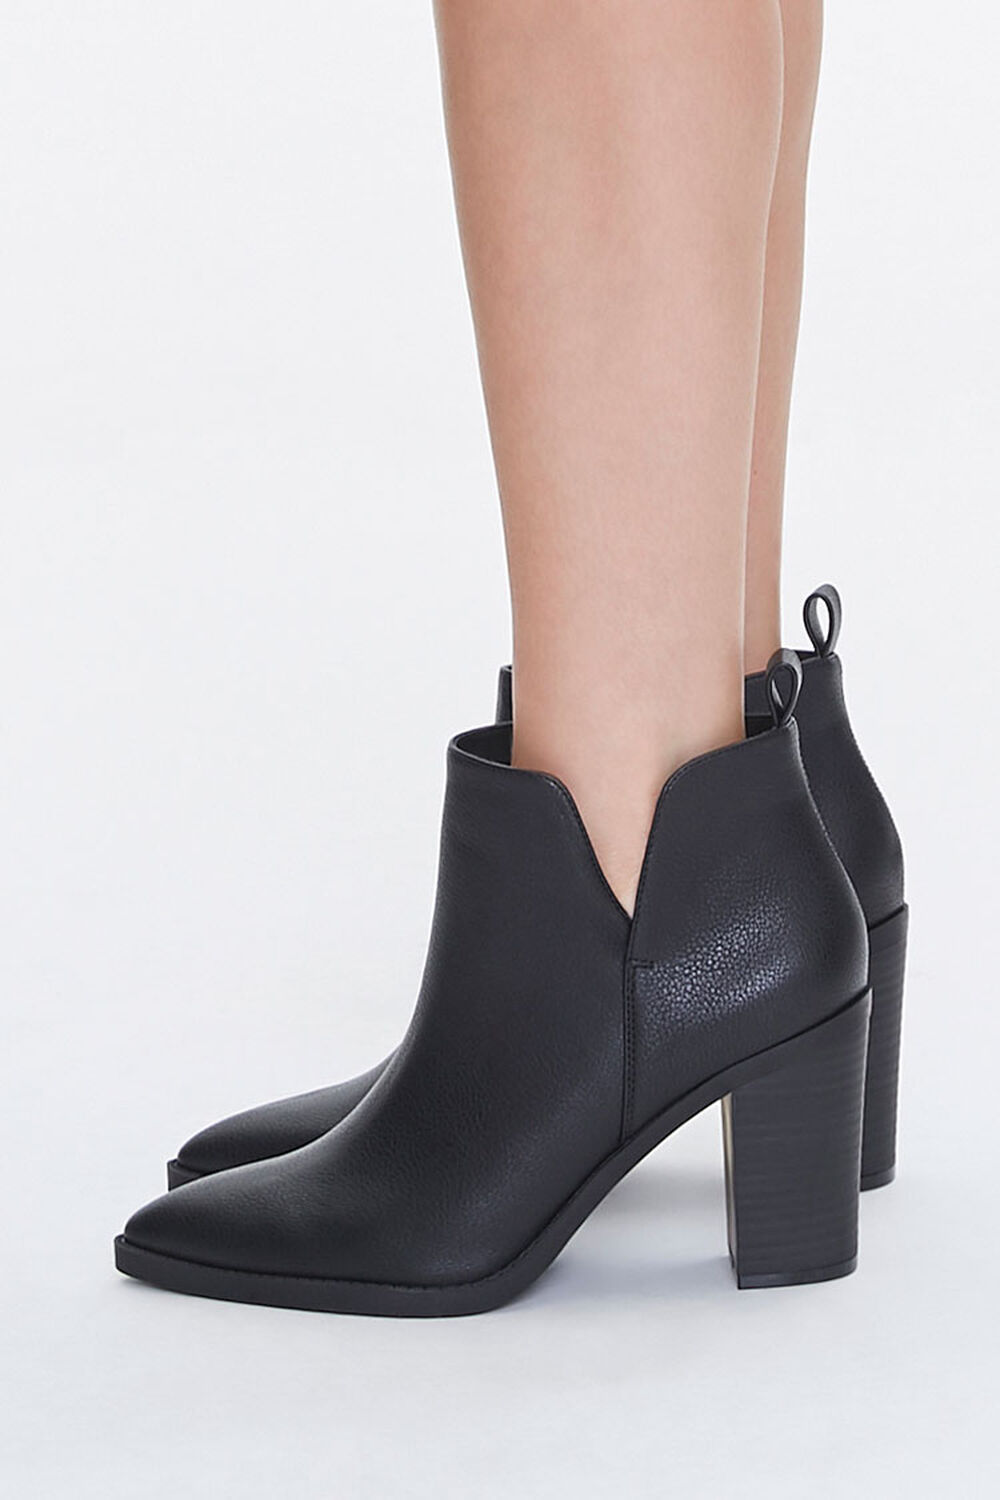 BLACK Faux Leather Pointed Booties, image 2